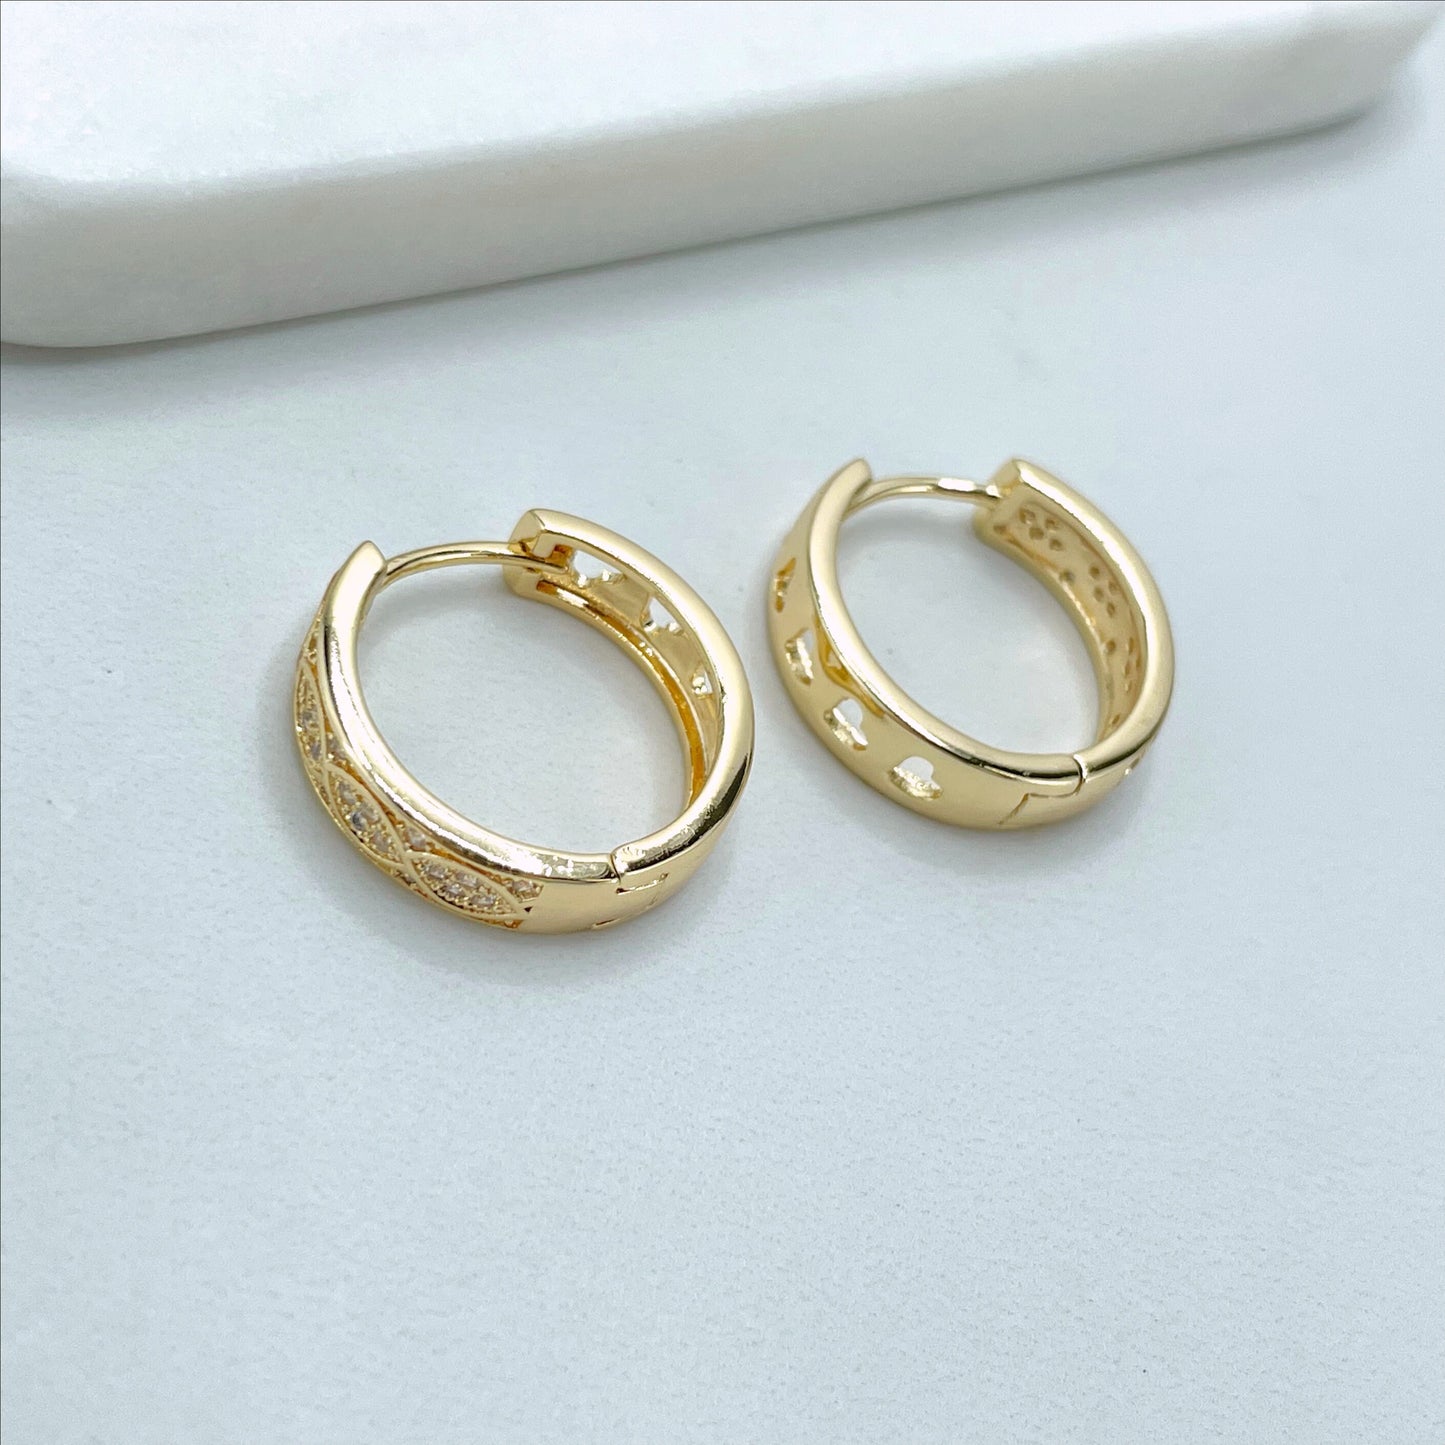 18k Gold Filled 9mm Huggie Hoops Earrings with Micro Cubic Zirconia and Hearts Cutout Back Design, Wholesale Jewelry Making Supplies